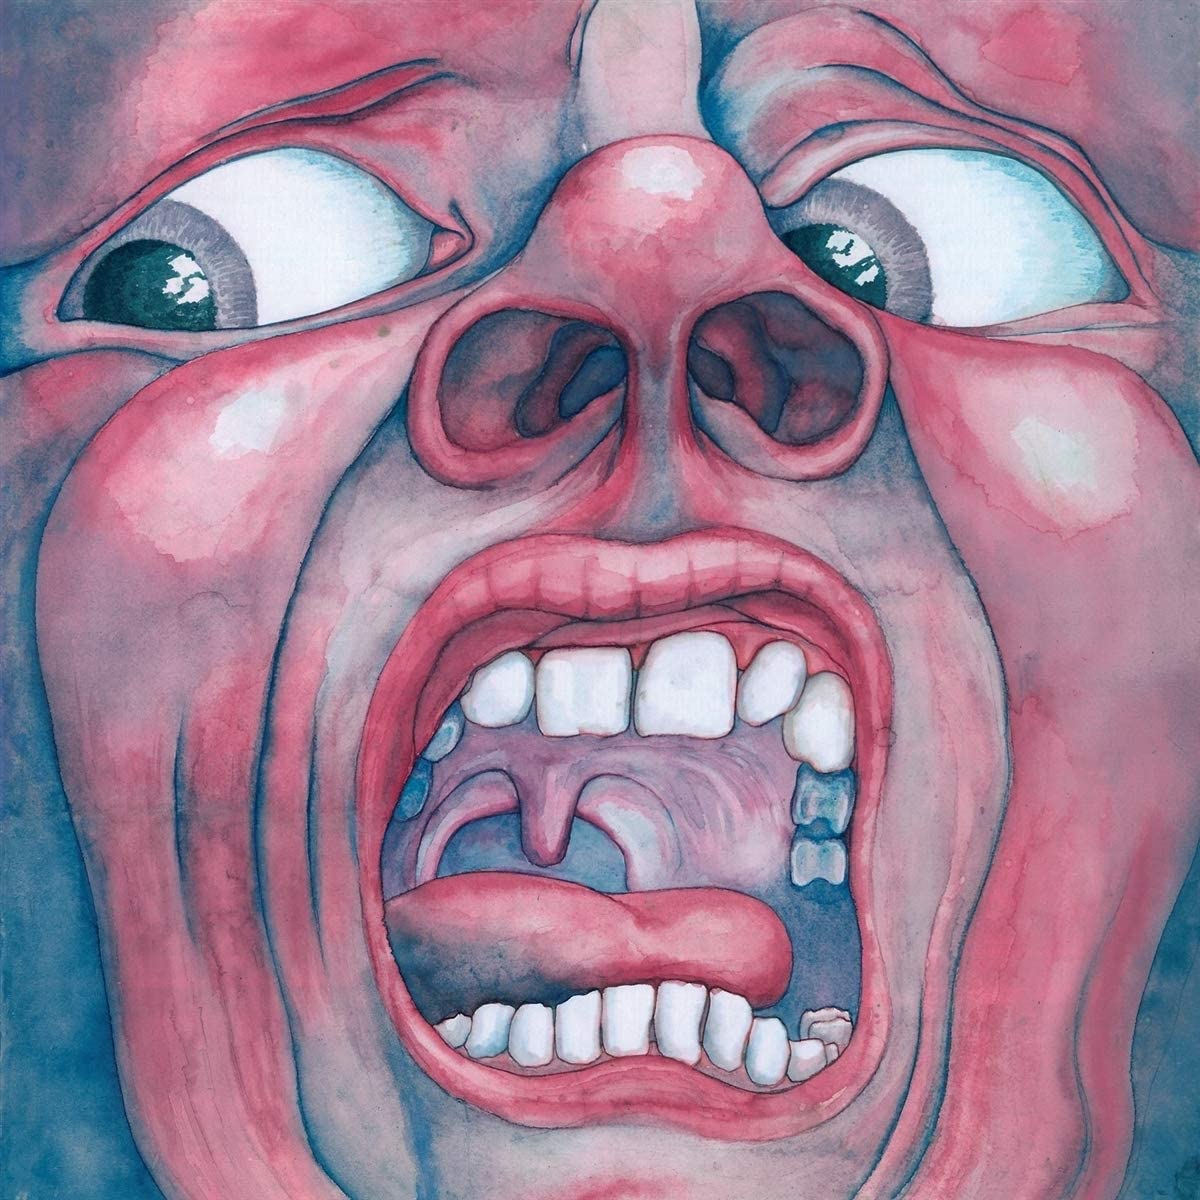 King Crimson -  In the Court of the Crimson King